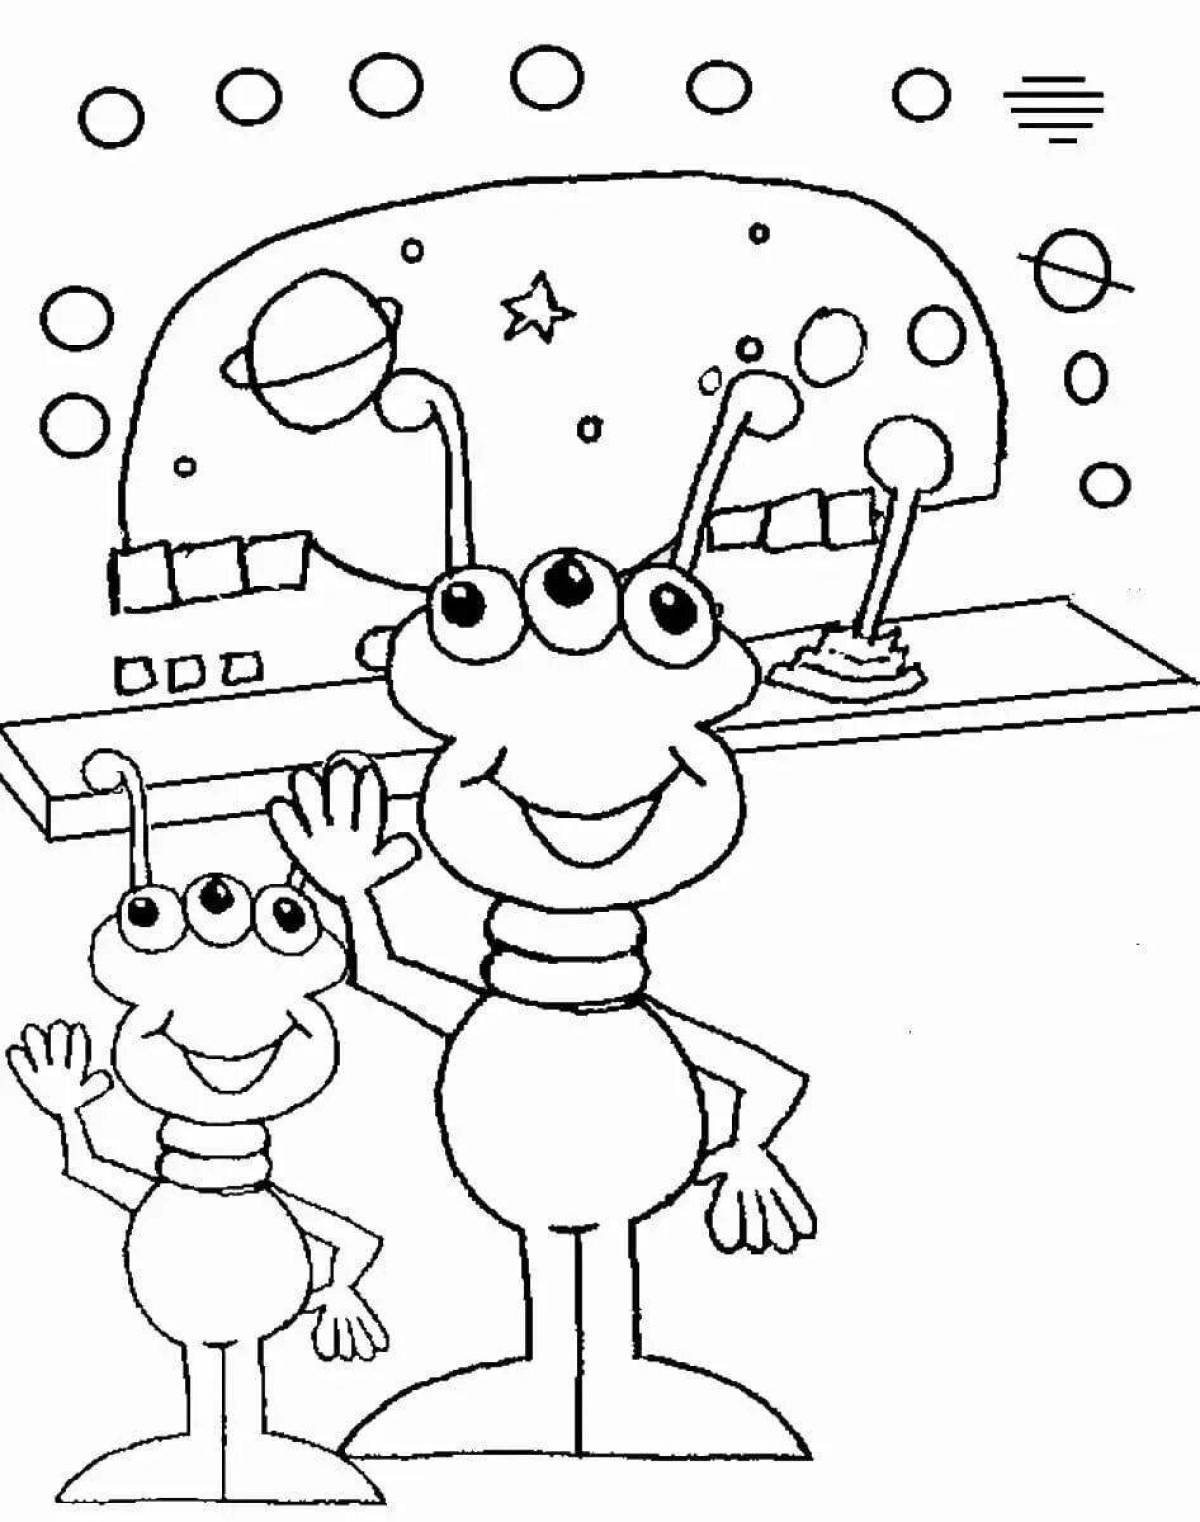 Color-delight aliens coloring page for kids